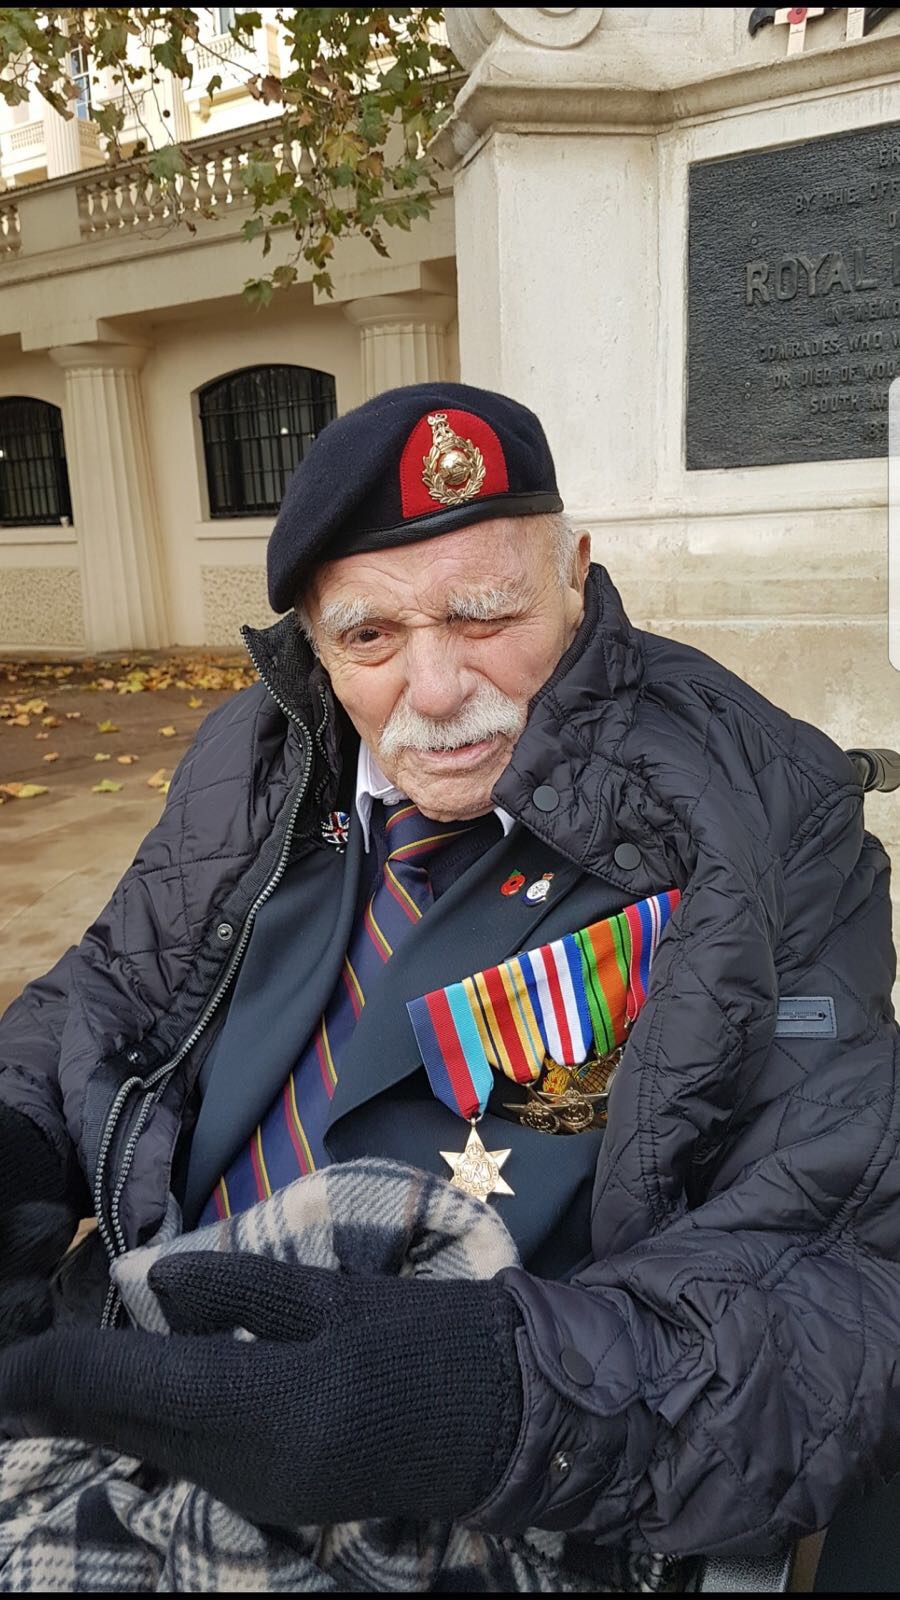 Remembrance Weekend – Our Ernie on the BBC